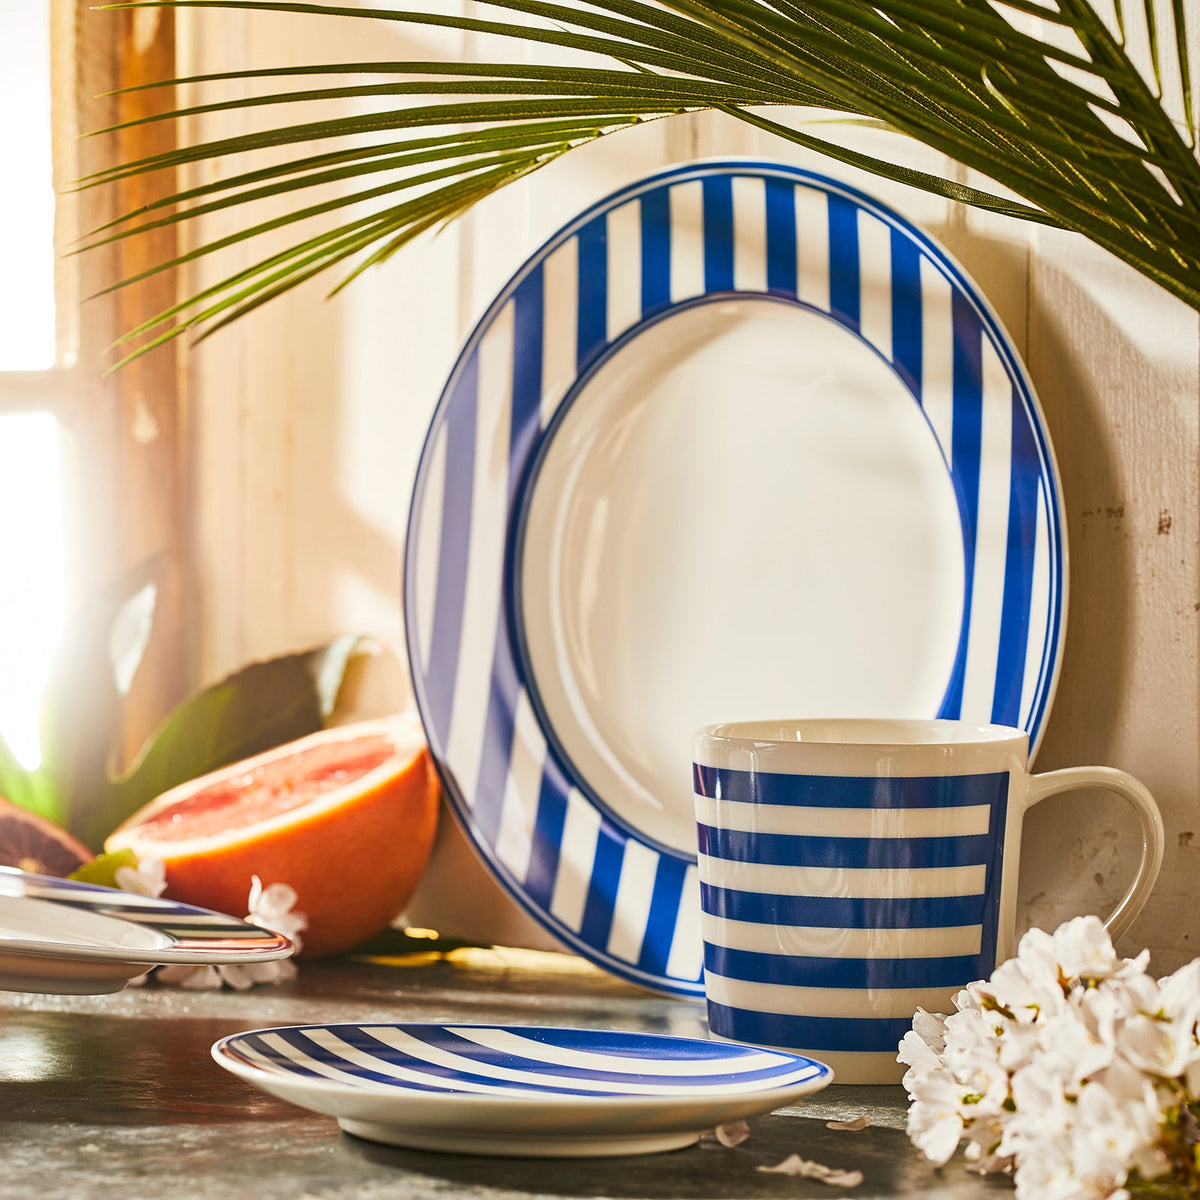 A blue and white striped dinnerware set, including a plate, a bowl, and a cup, arranged on a table near a sliced grapefruit and flowers with sunlight streaming through a window. The Beach Towel Stripe Small Plates by Caskata Artisanal Home add an elegant touch to the sunny breakfast scene.